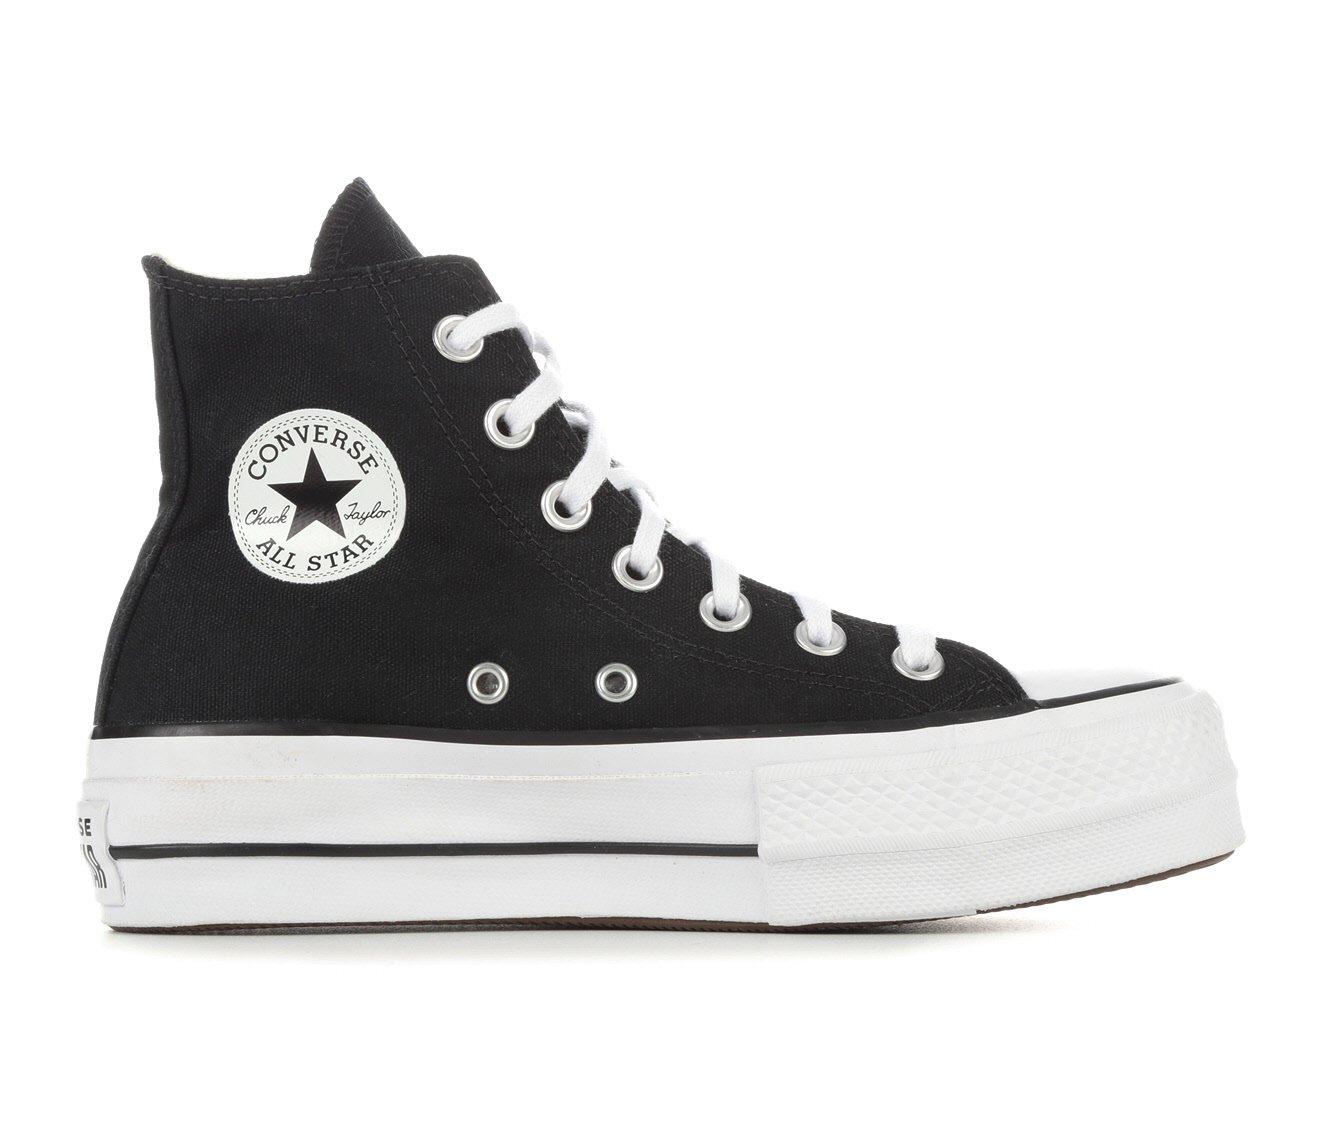  Converse Women's Chuck Taylor All Star Leather Low Top  Sneaker, Black, 4.5